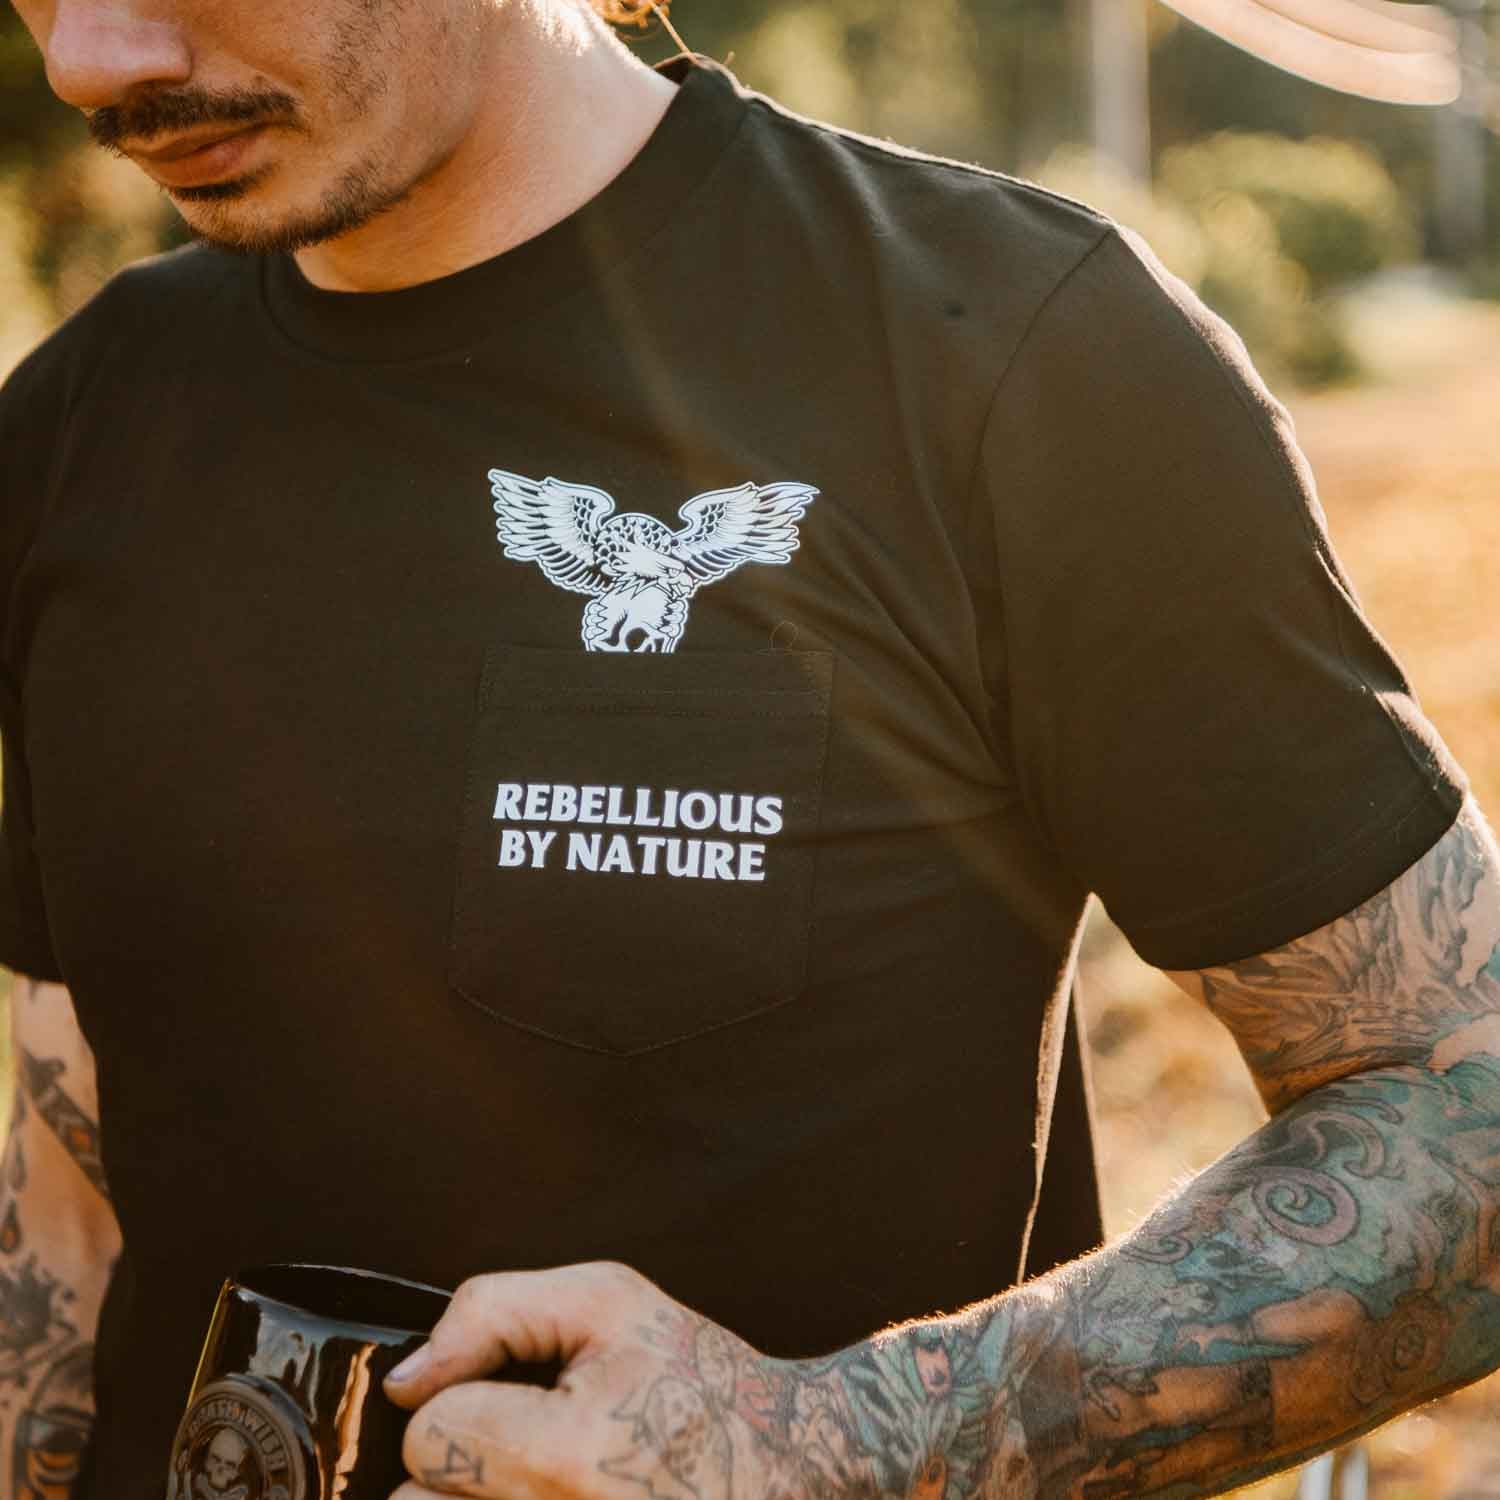 Drinking coffee in the Death Wish Coffee Rebellious by Nature Pocket Tee.